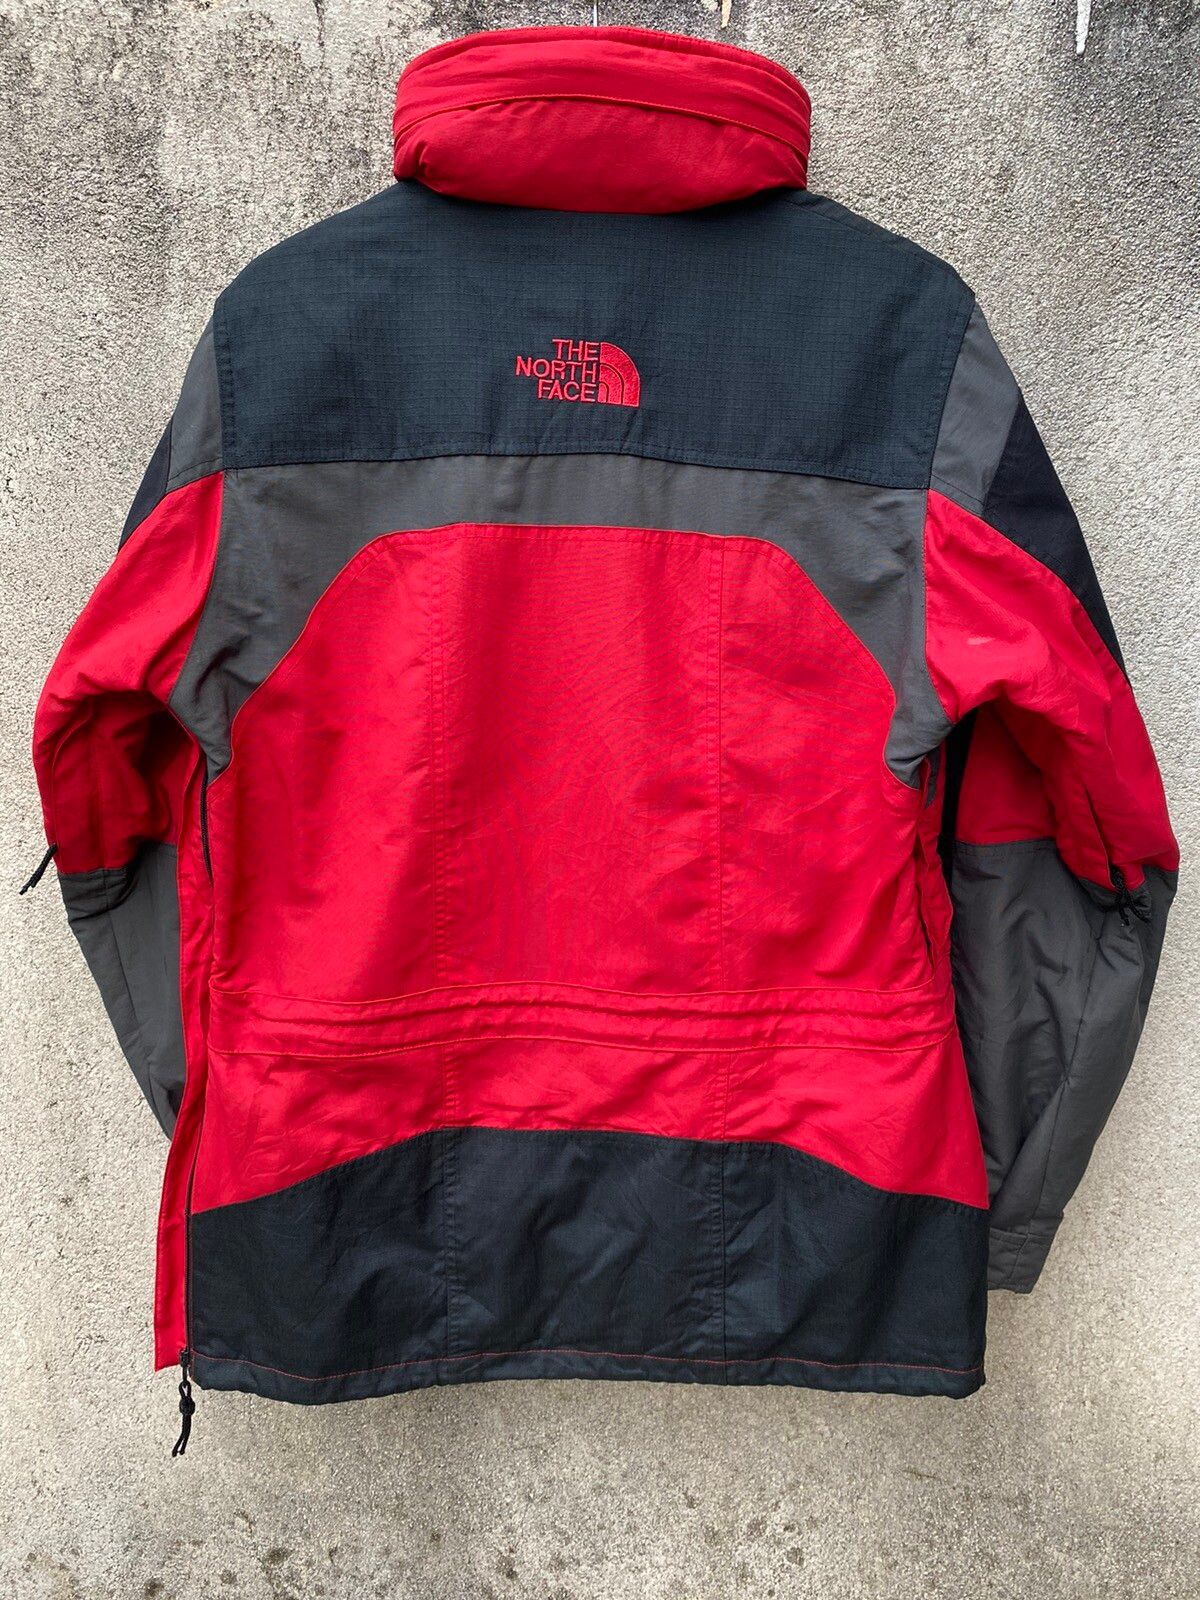 🔥The North Face Extreme Gear Pullover Anorak Rare Design - 2